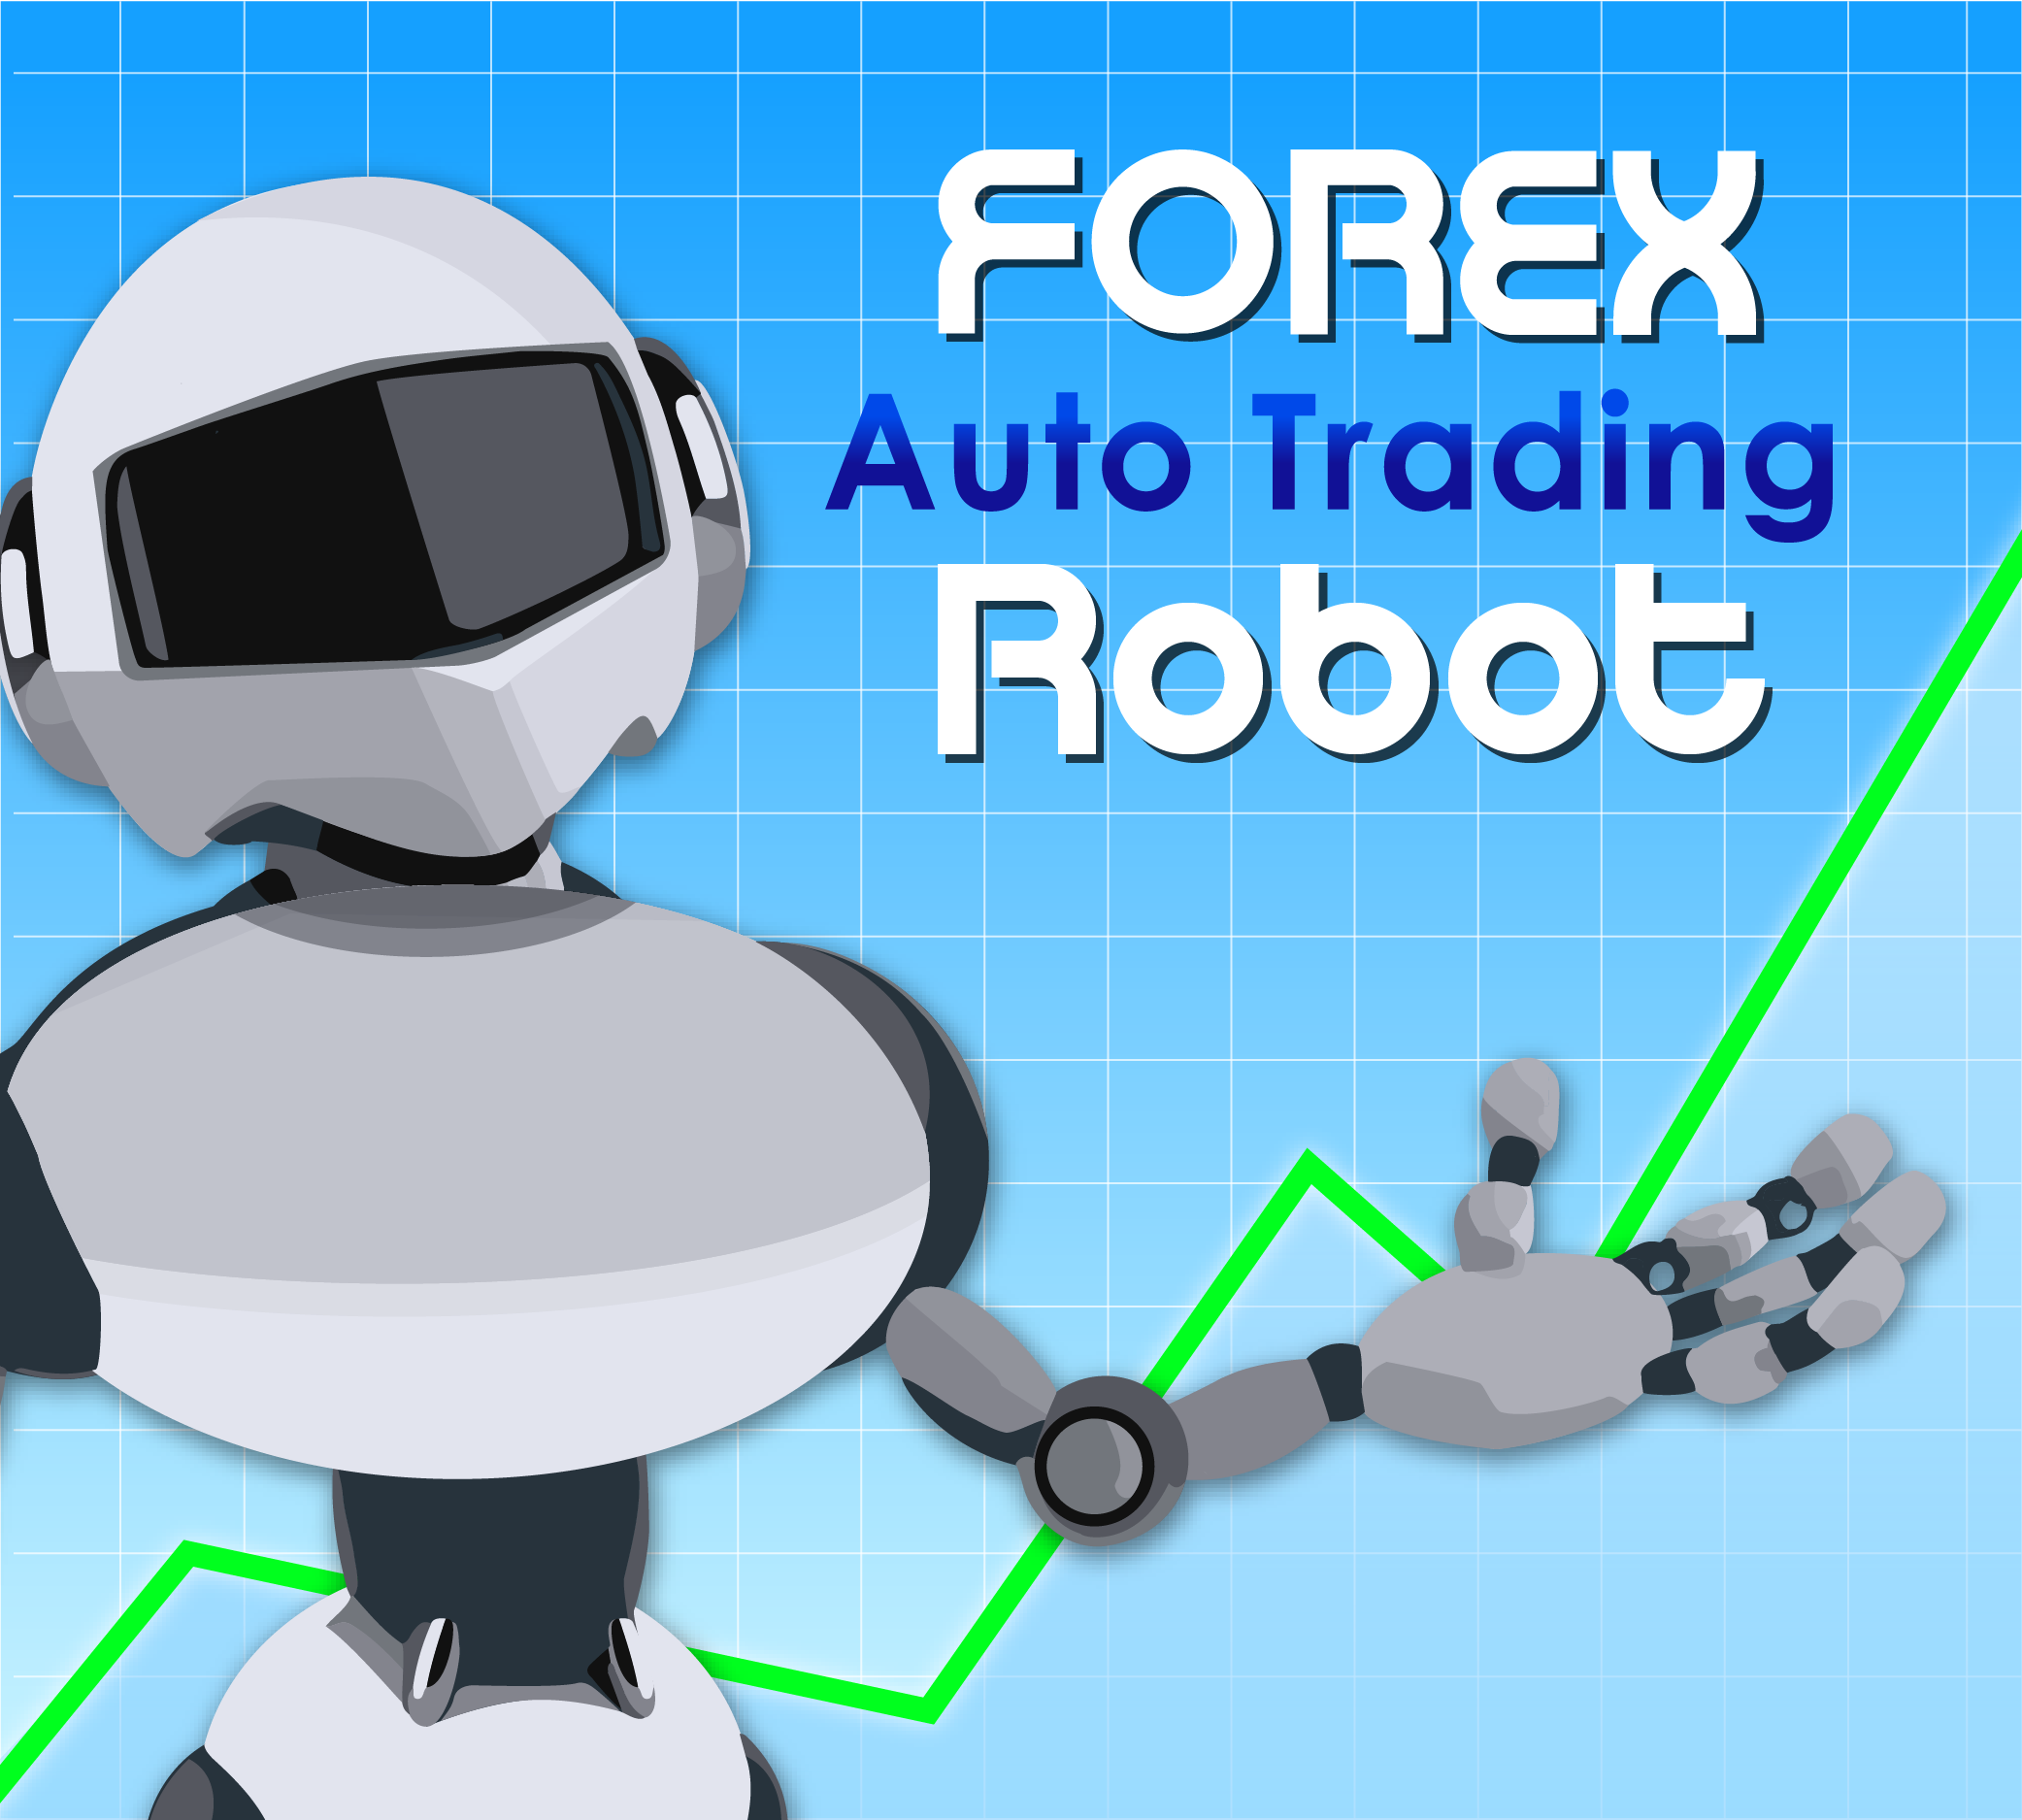 Forex Trading Robot: Trade Forex 24 Hours a Day